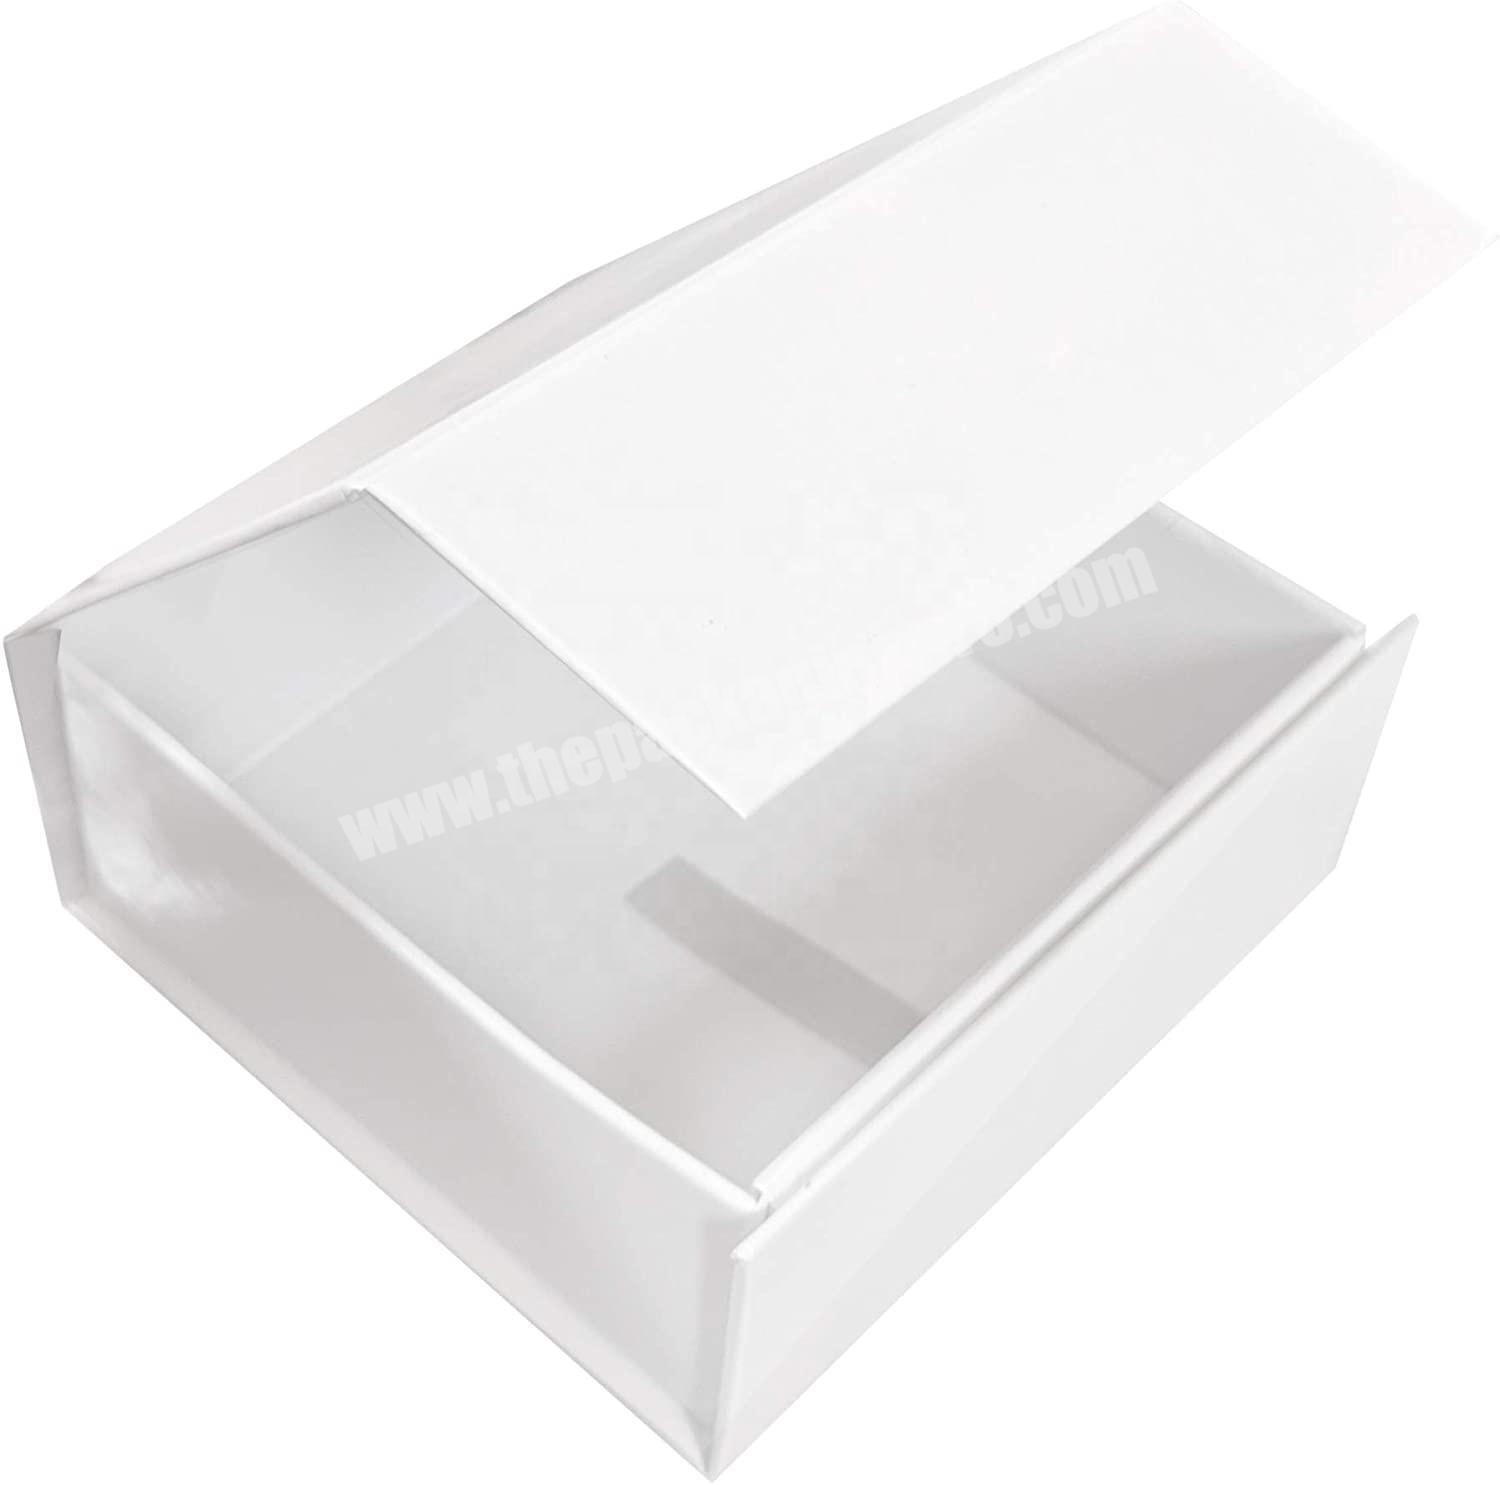 White Hard Gift Box with Magnetic Closure Lid Square Boxes for Truffles, Candy, Jewelry, Small Gifts with White Glossy